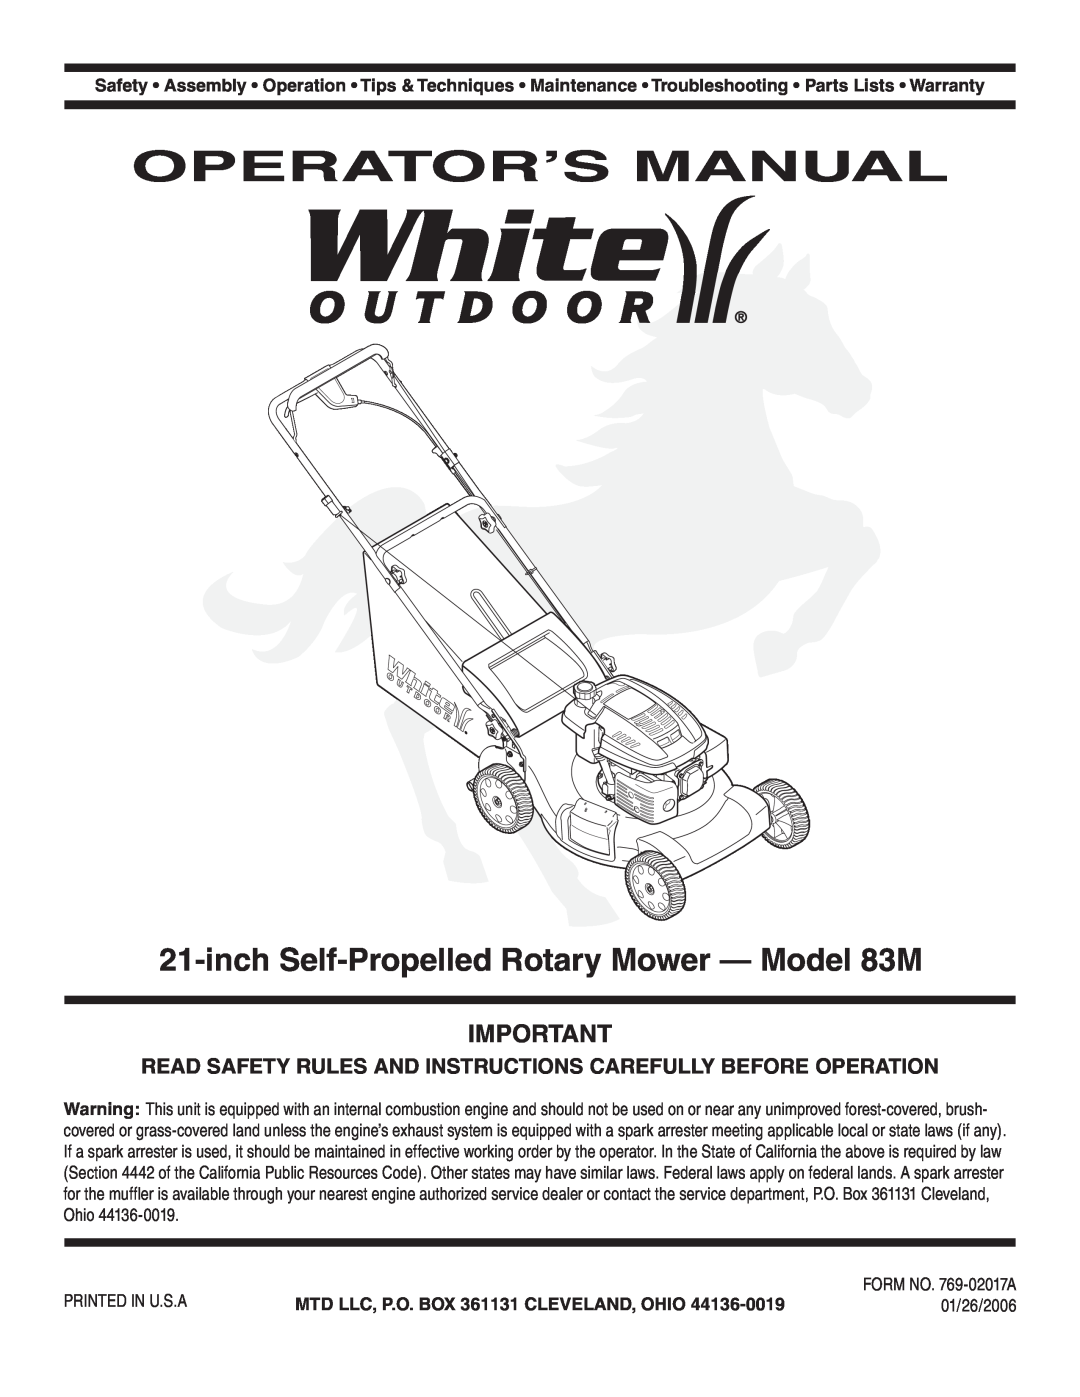 White Outdoor warranty Operator’S Manual, inch Self-Propelled Rotary Mower - Model 83M 